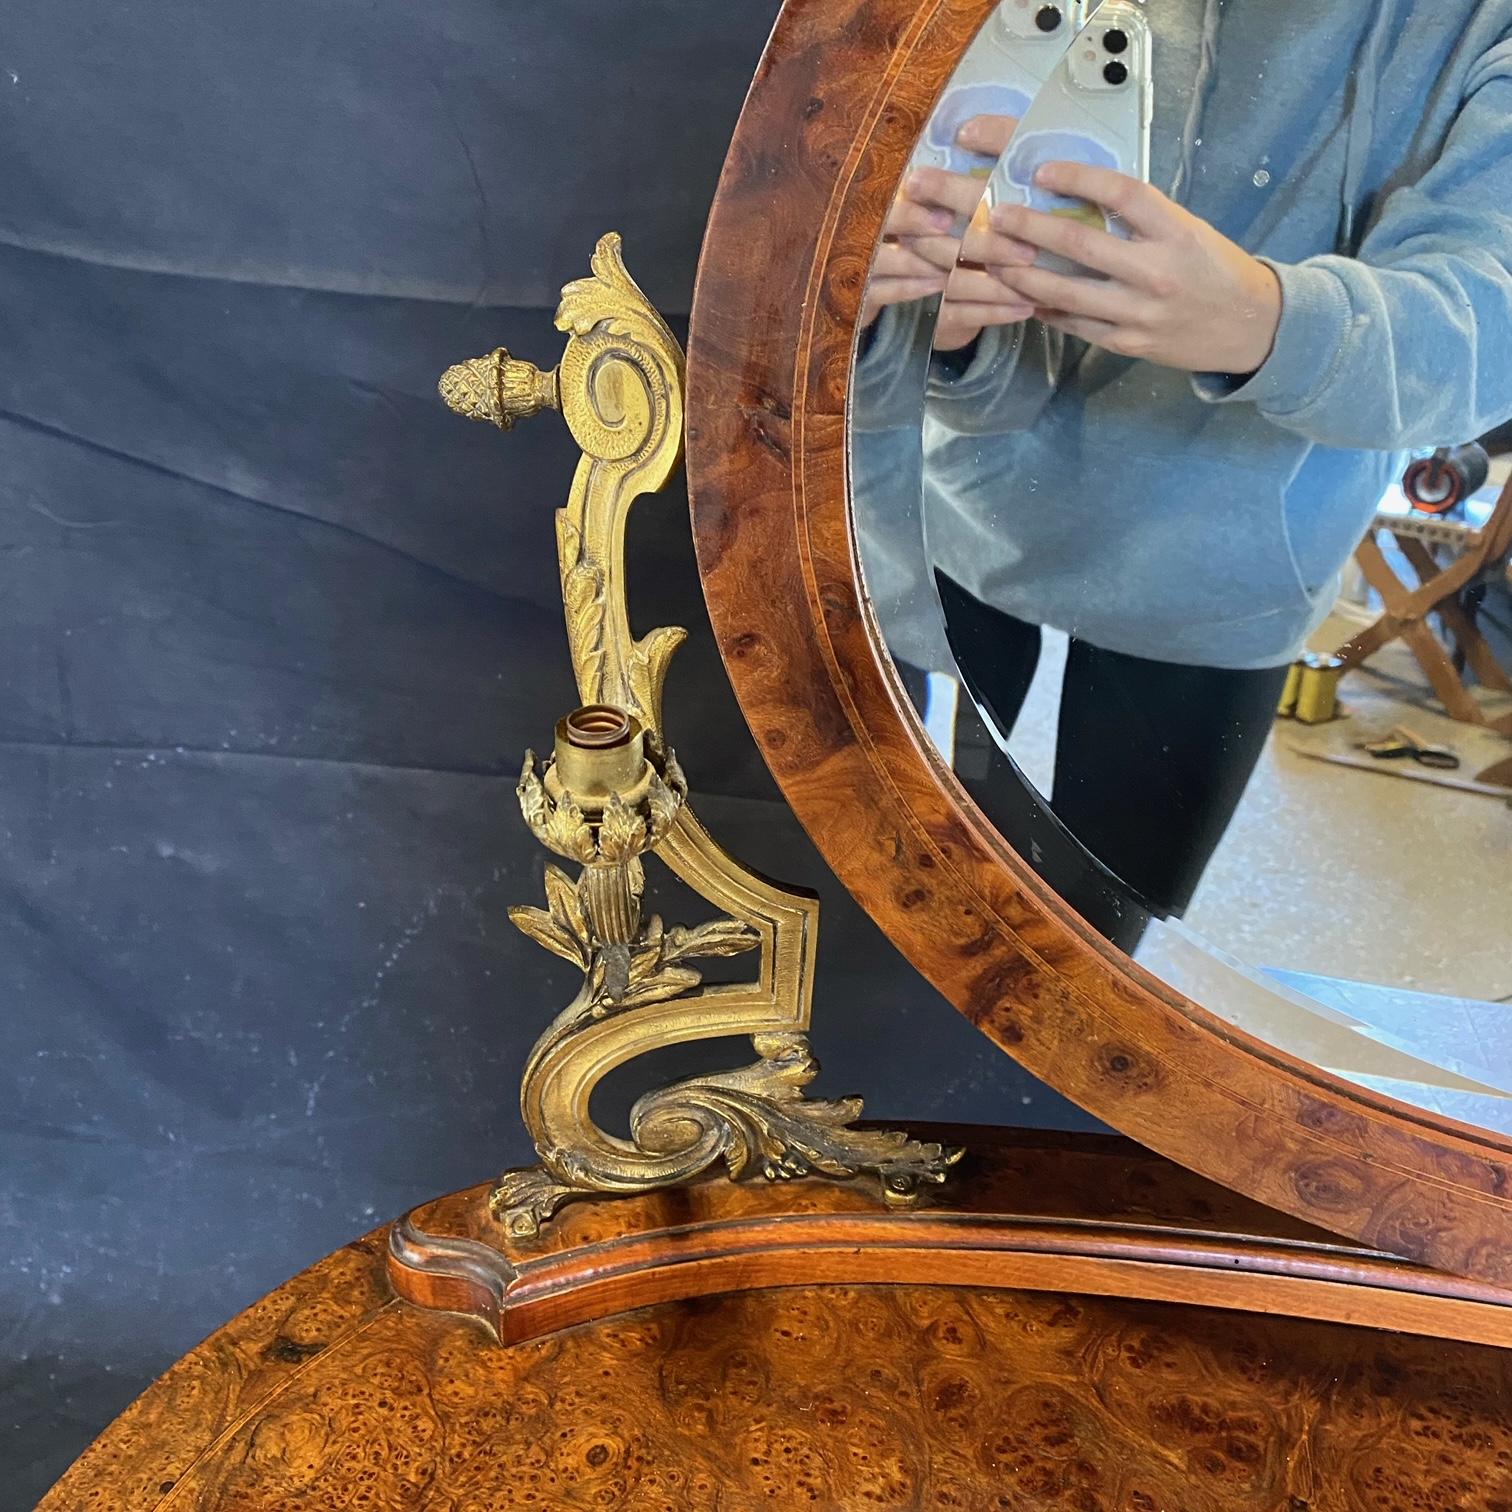 Stunning French burled walnut dressing table with beveled mirror having side mounted bronze candelabras and acorn finial mirror supports. Beautifully turned legs and bronze mounted feet. Center drawer with bronze ring pull. H of surface